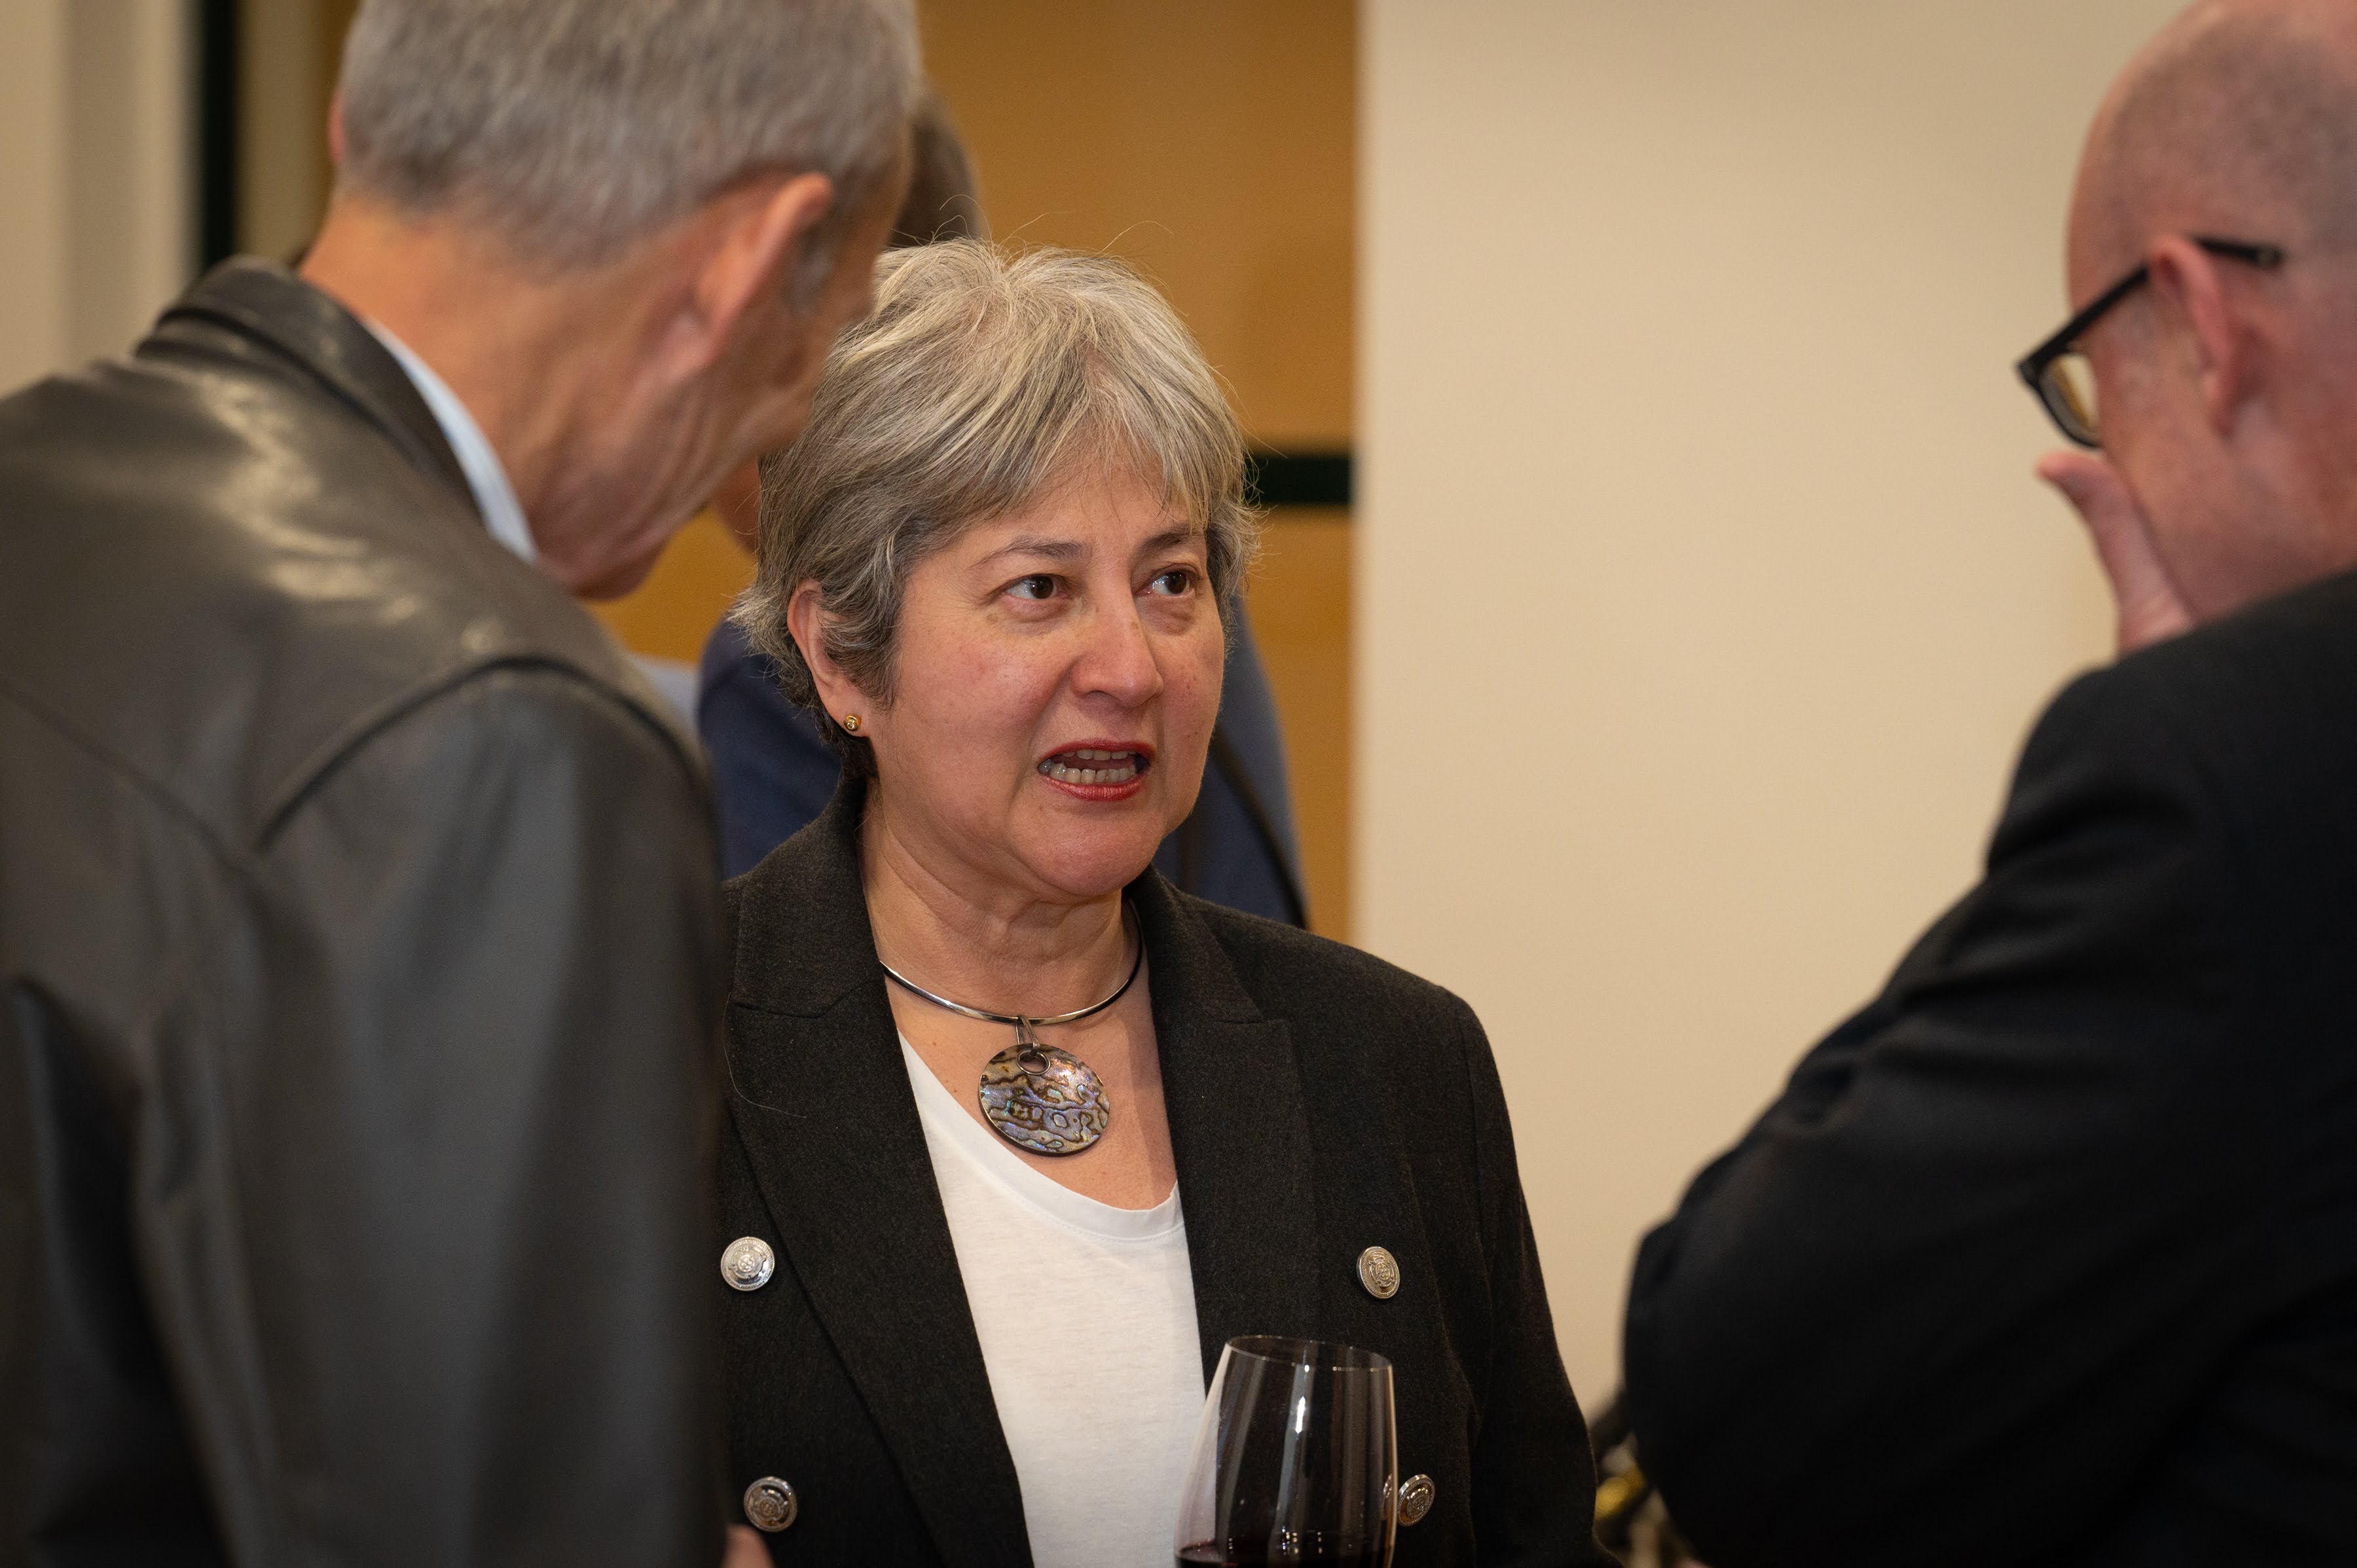 Her Excellency, Vicki Treadell, British High Commissioner to Australia  The John Howard Prime Ministerial Library in partnership with the National Archives of Australia hosts an evening with Sir Anthony Seldon